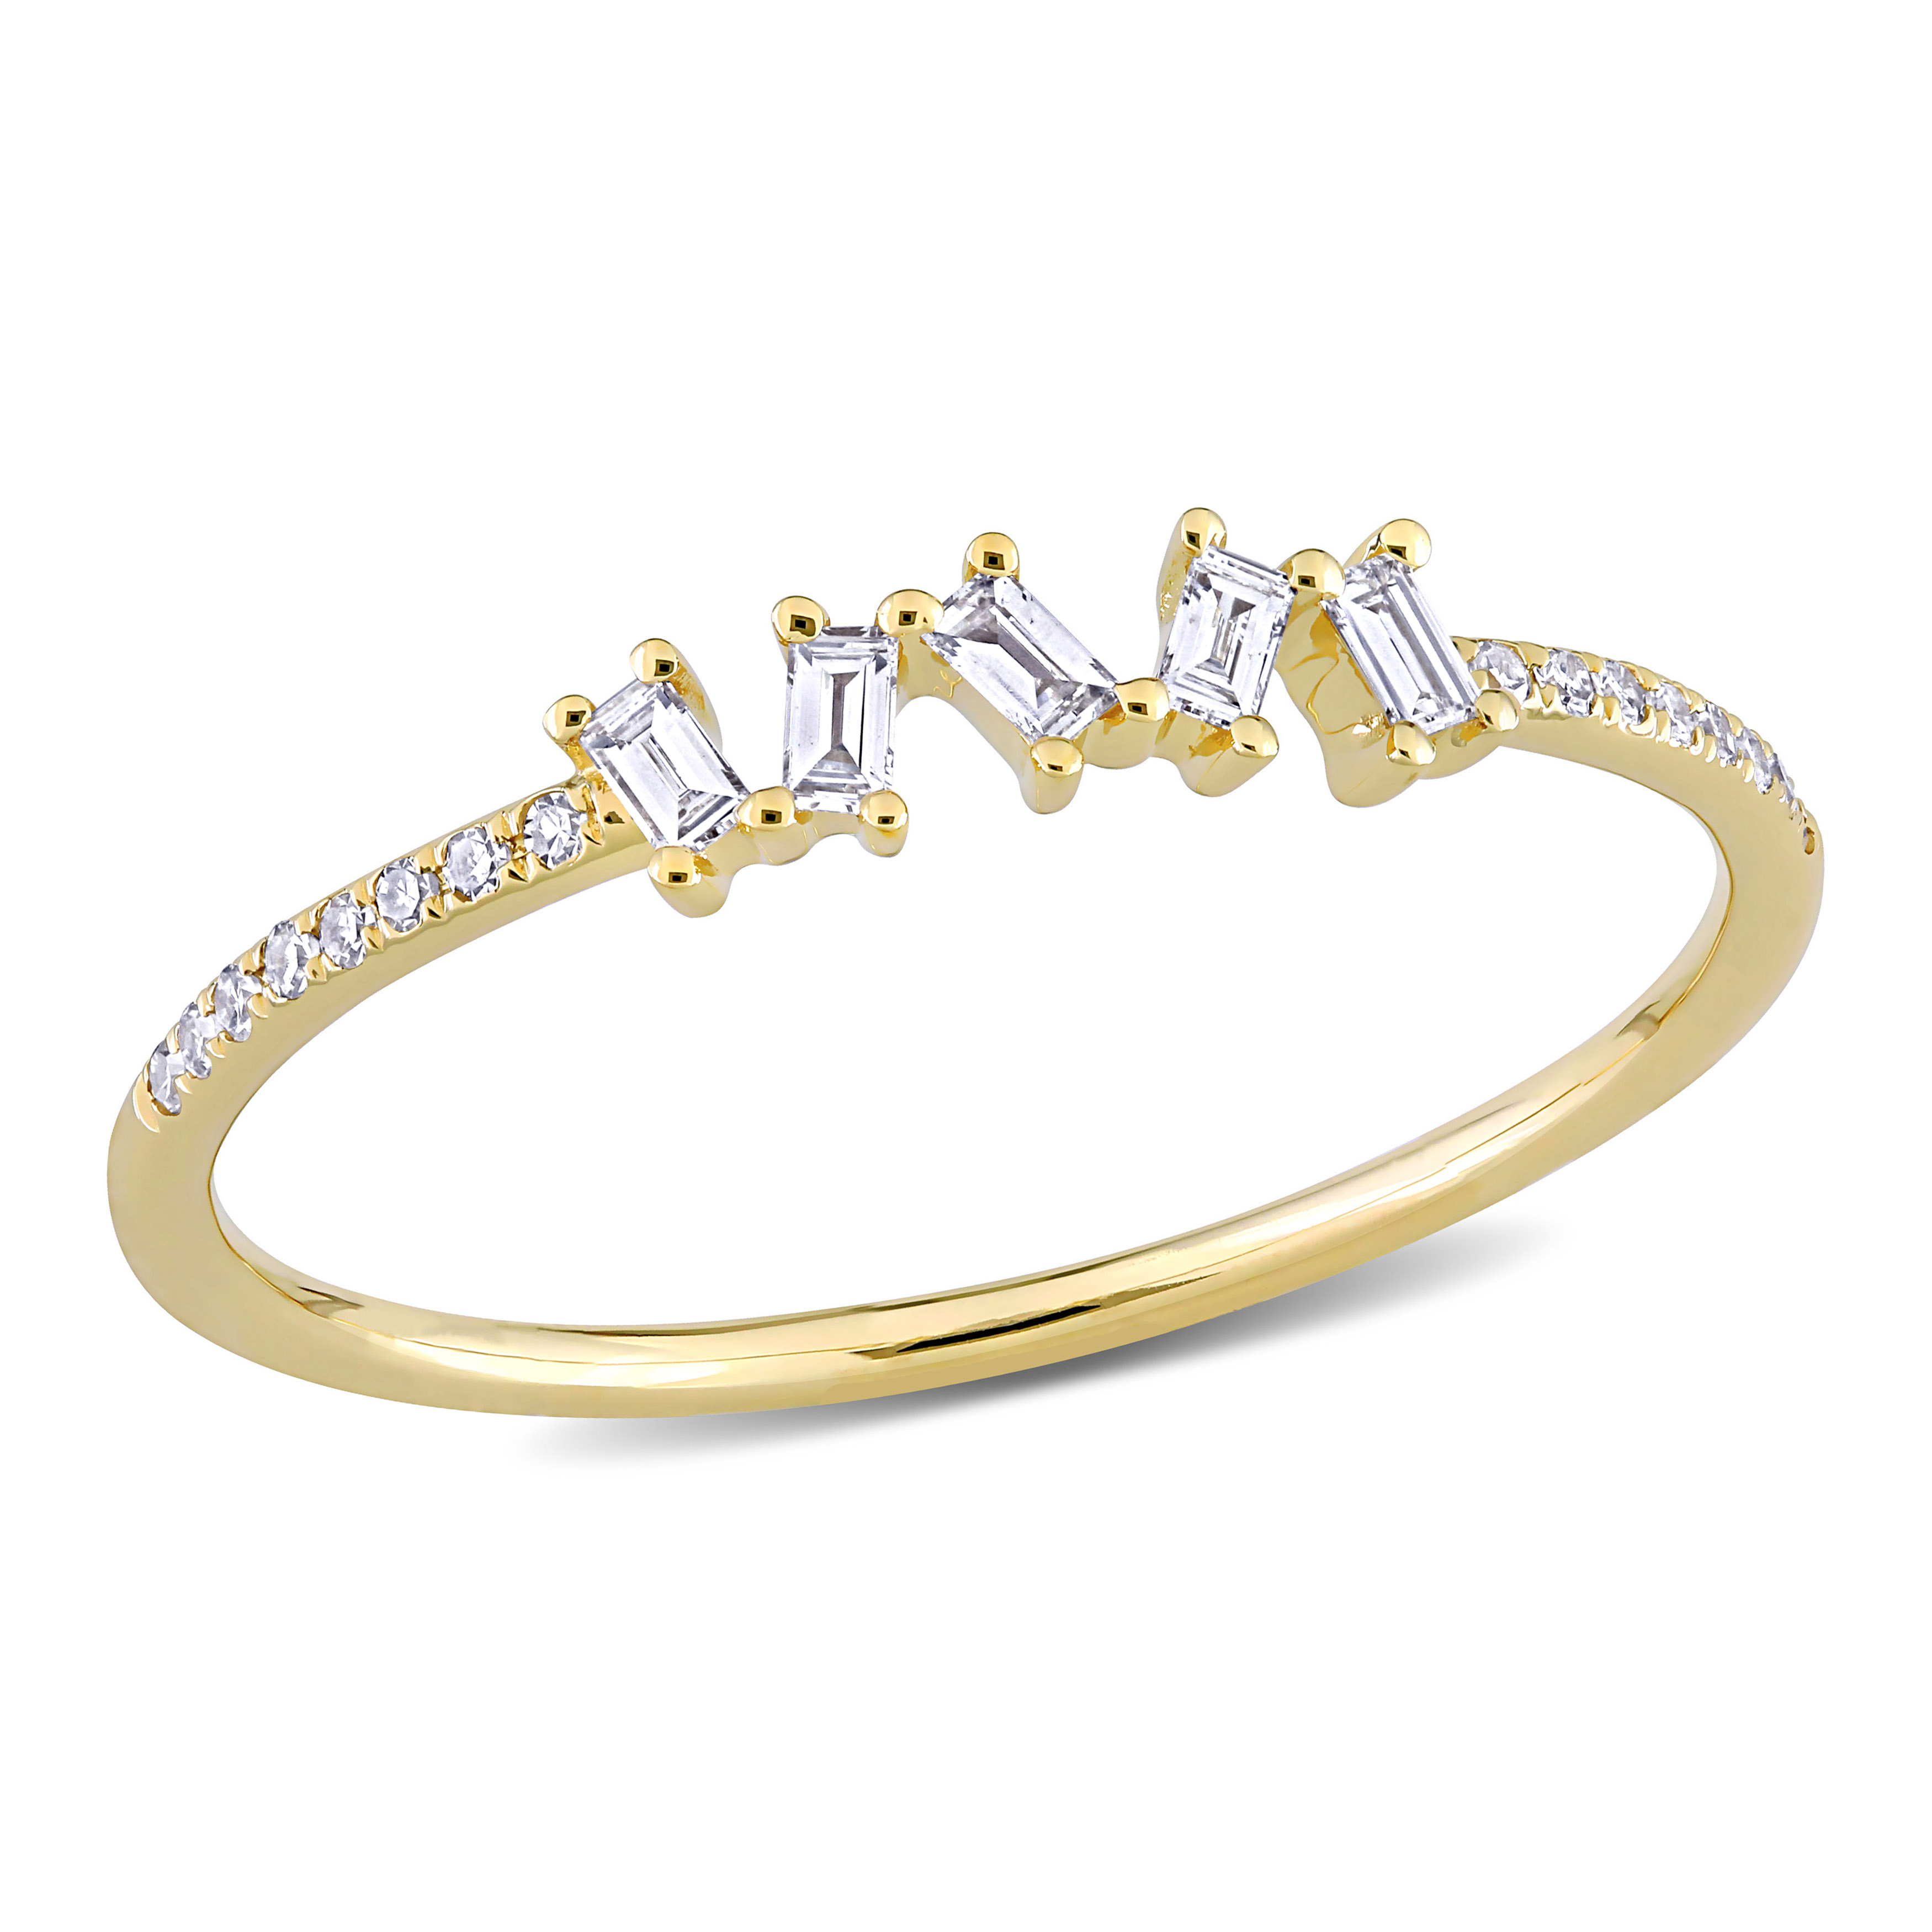 1/6 CT TW Baguette & Round Diamond Ring in 14k Yellow Gold